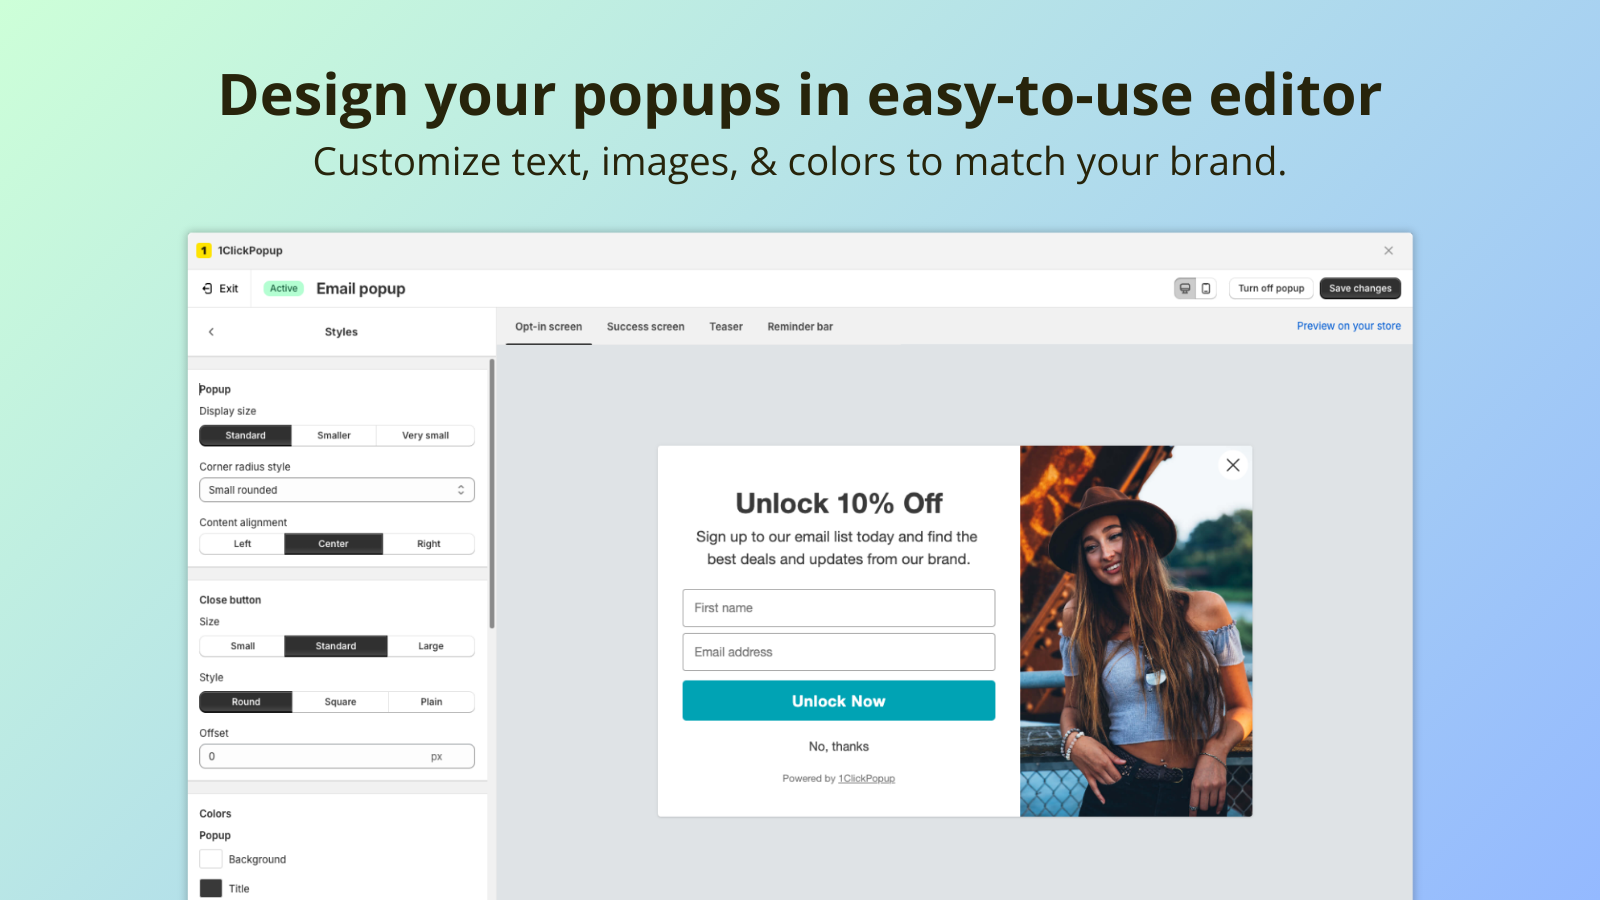 Design your popups in easy-to-use editor